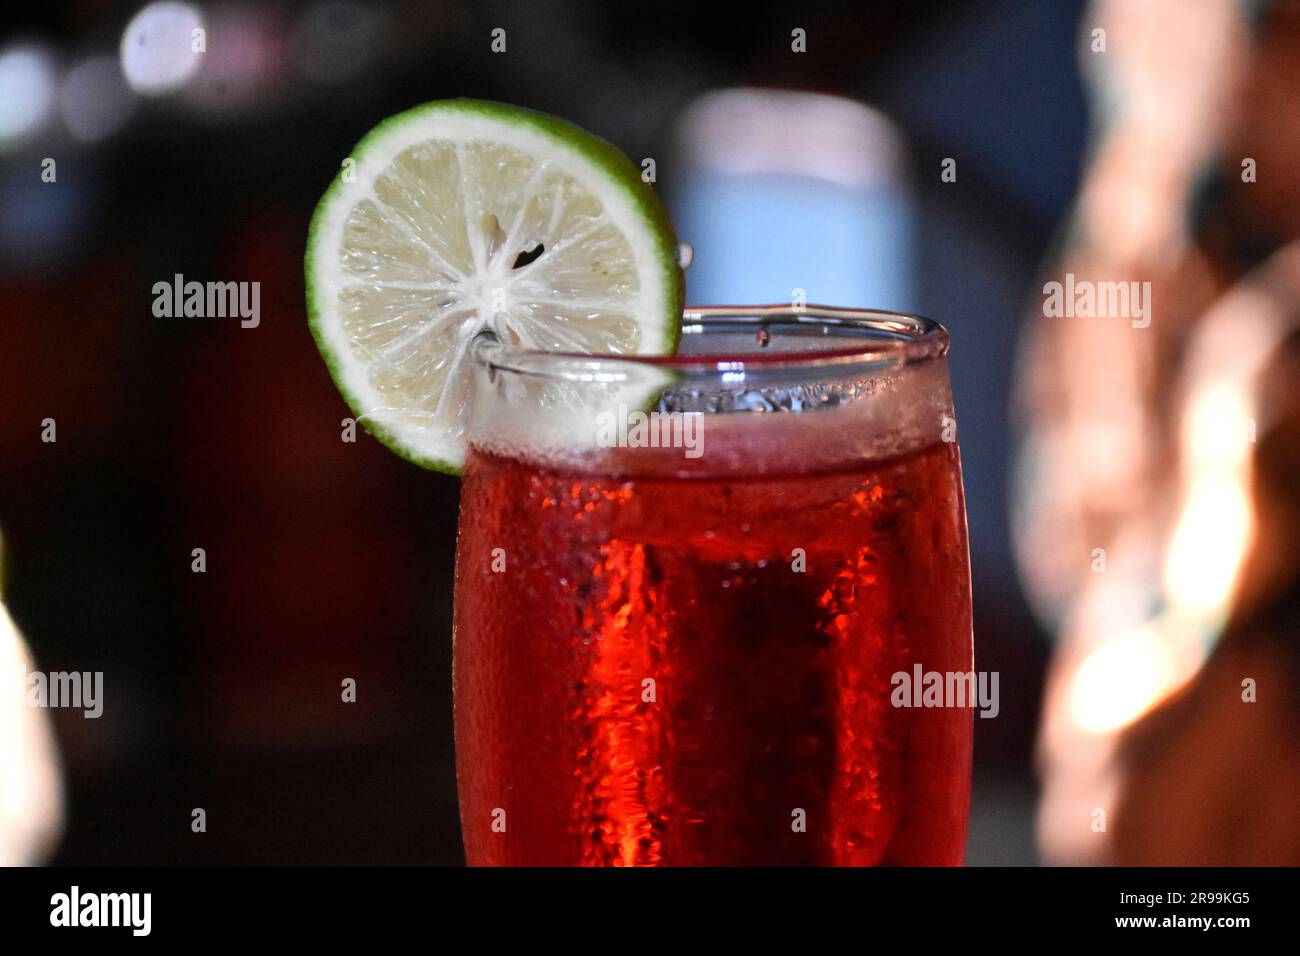 Drinking red drinks gives energy to the body and increases excitement Stock Photo